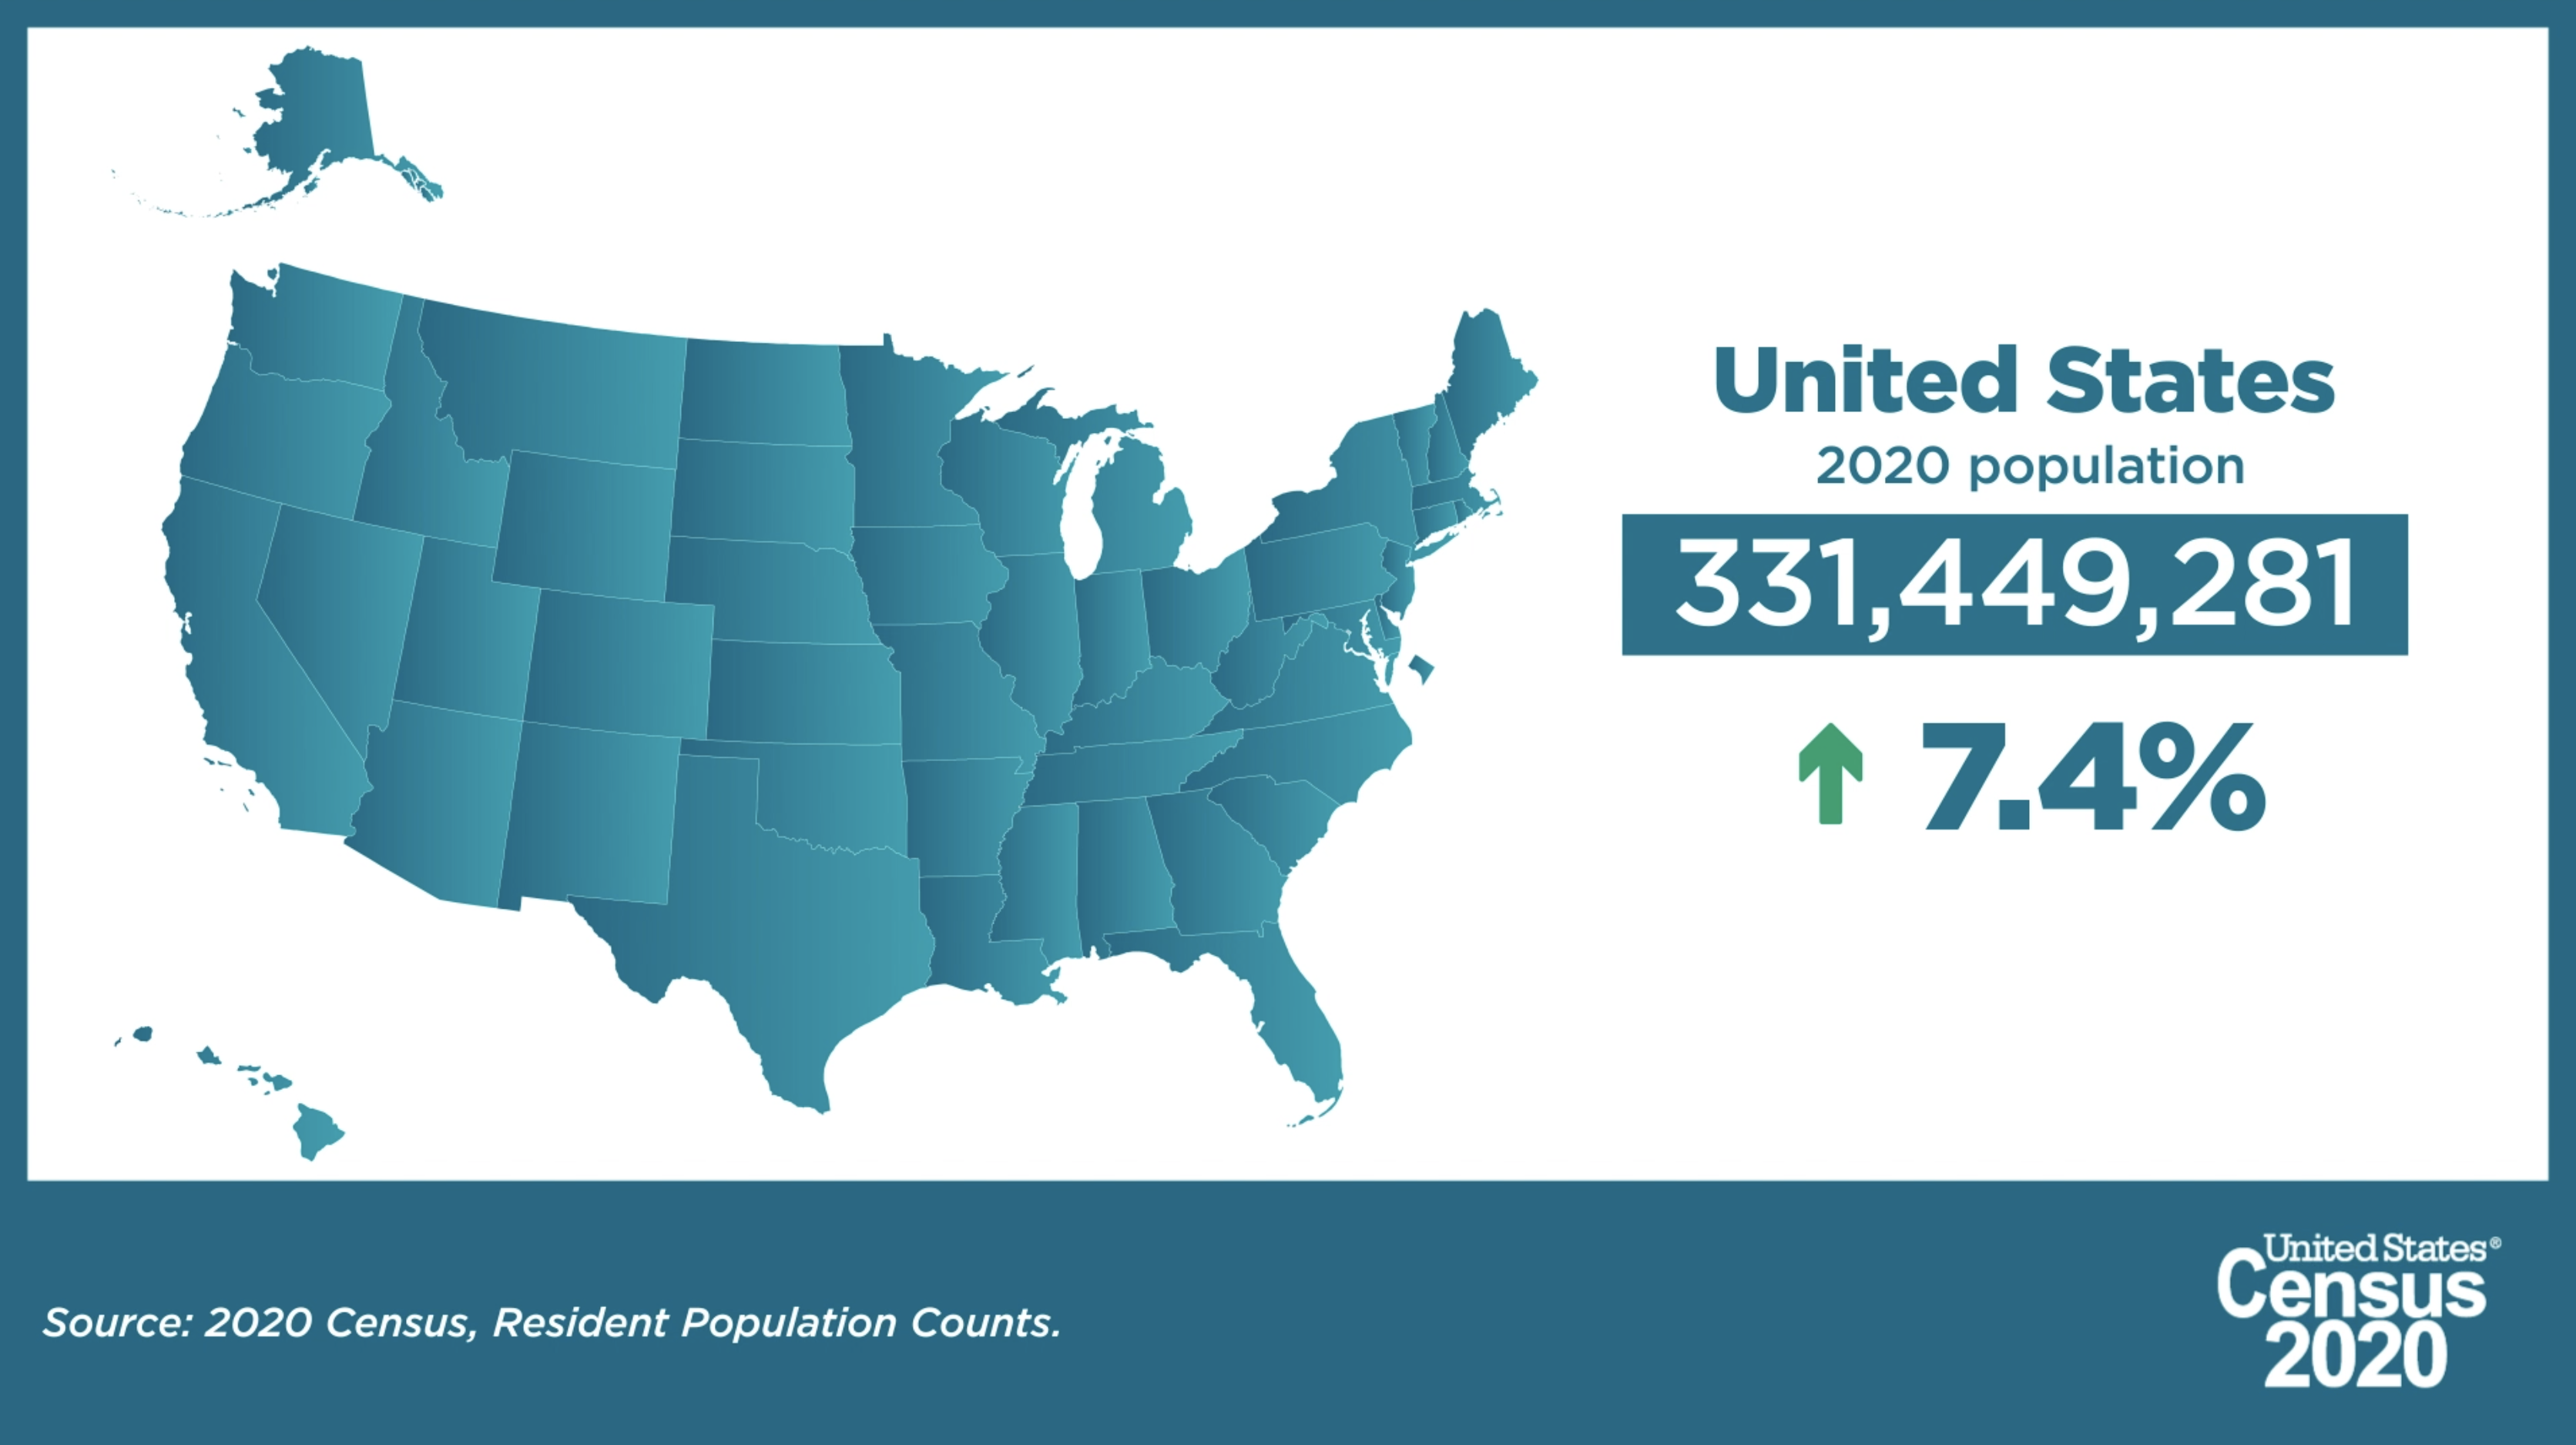 Landscape map of the United States with text showing population and percentage increase since 2010